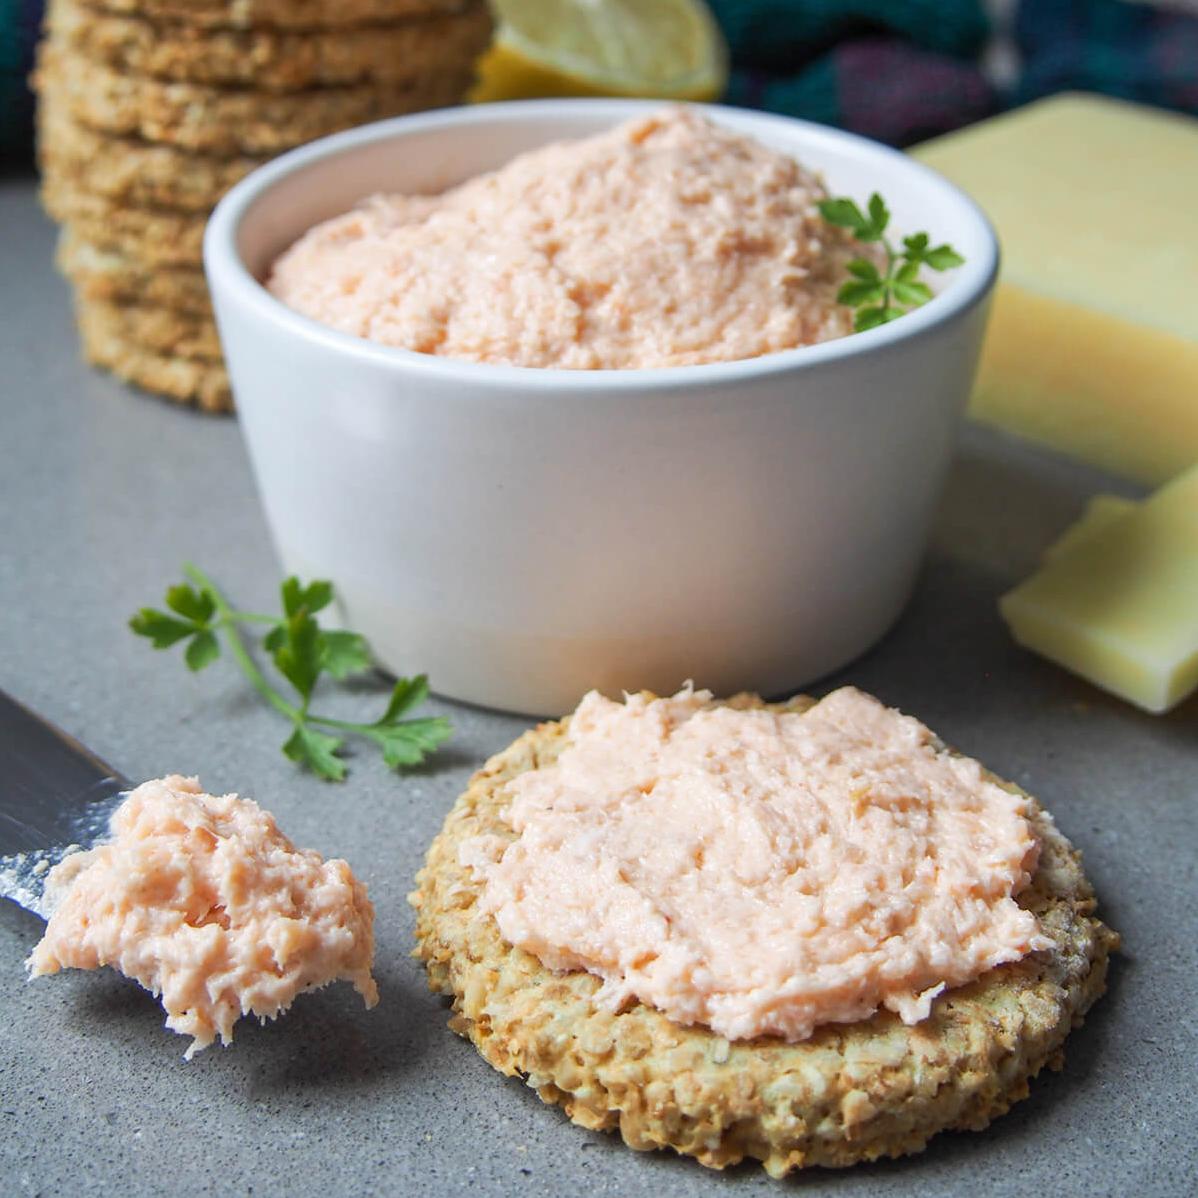  My taste buds are already in love with this Scottish take on classic paté.